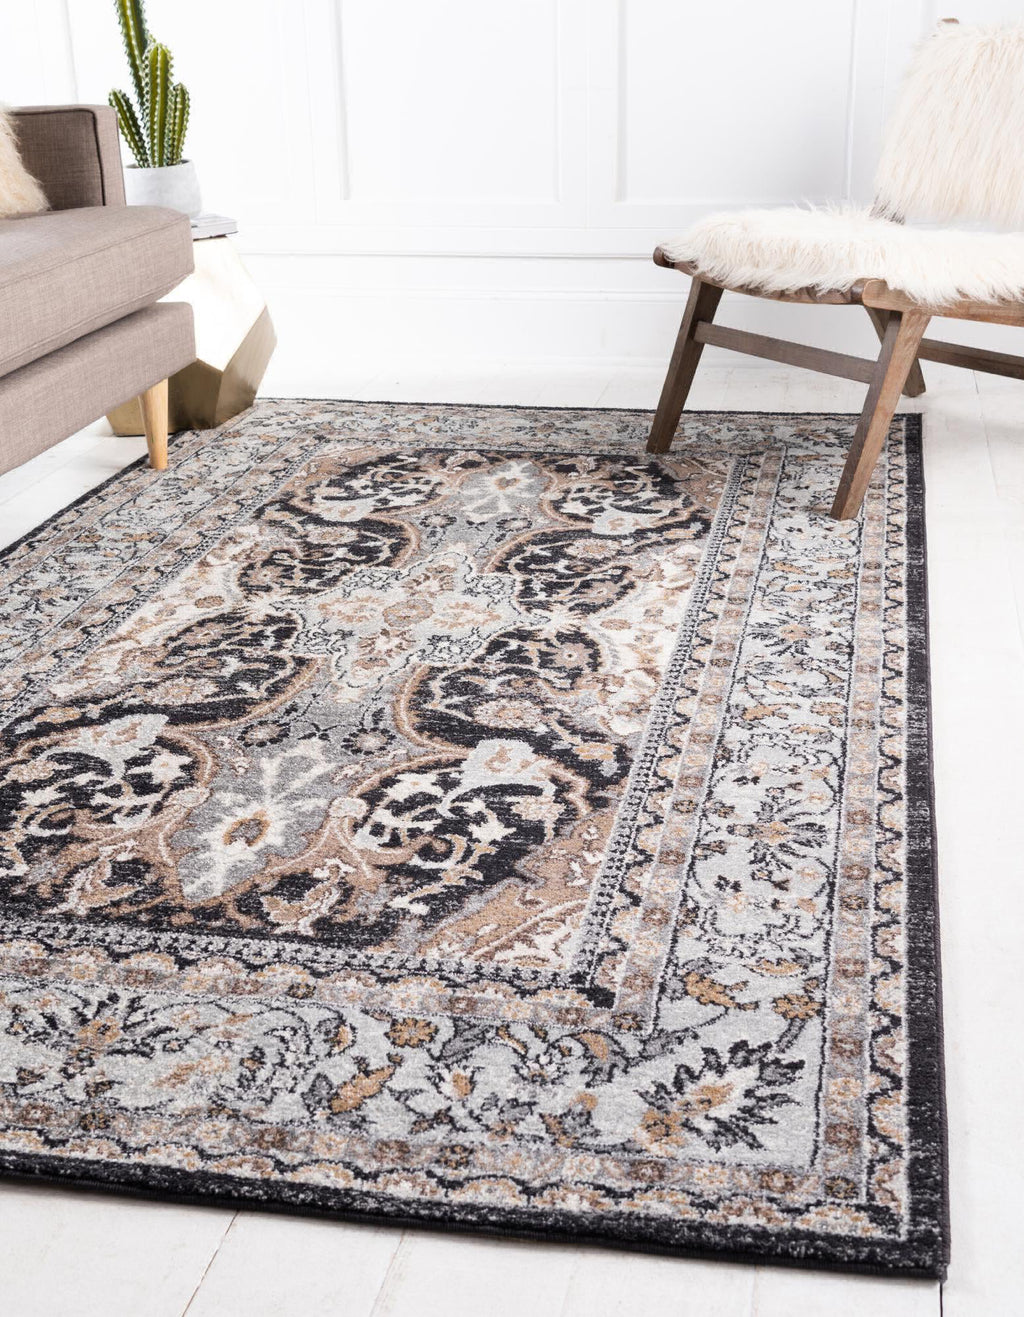 Unique Loom Tradition T-HERITAGE-5206 Charcoal Area Rug Rectangle Lifestyle Image Feature